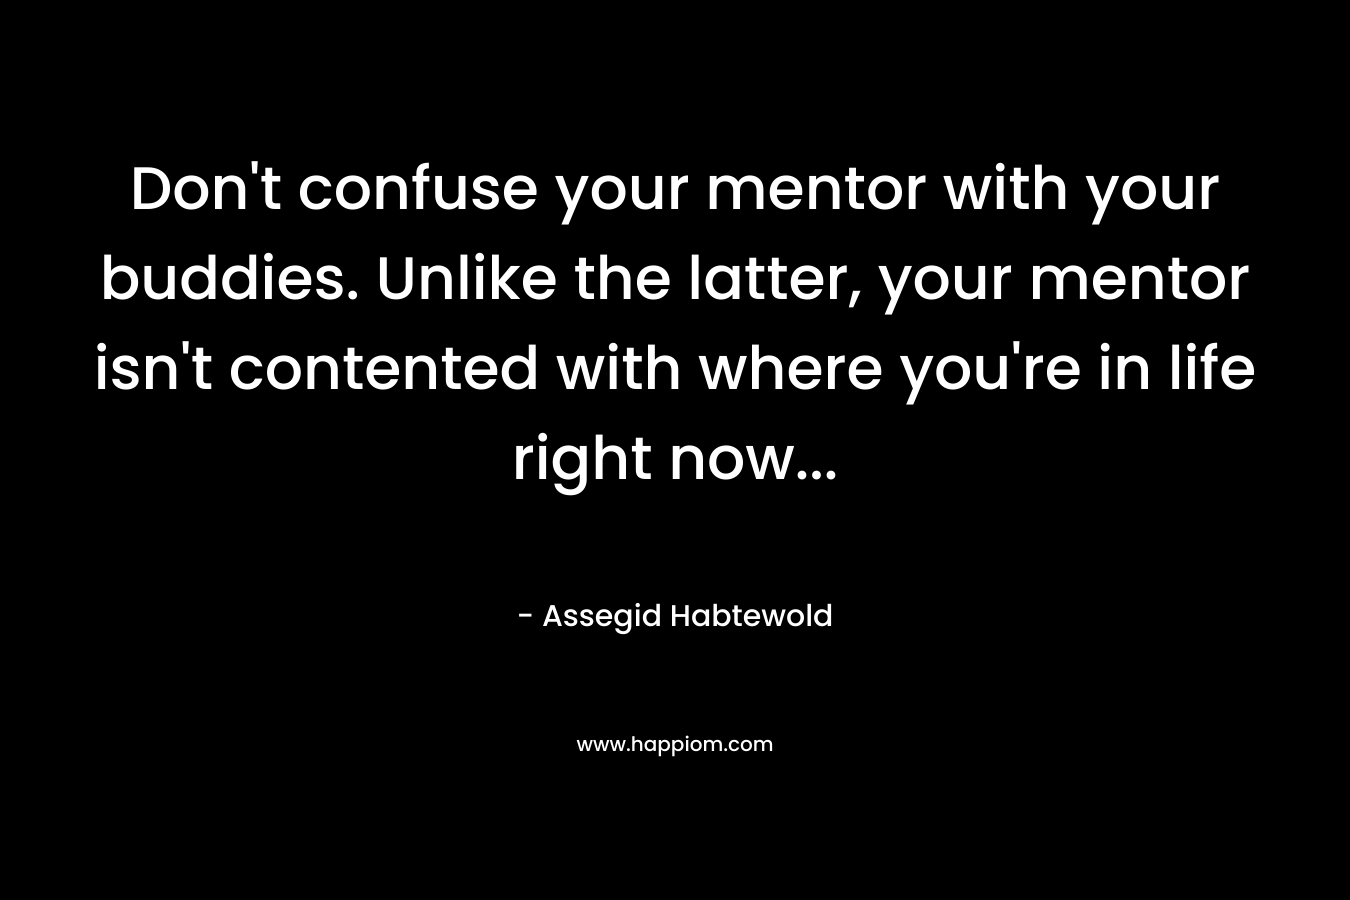 Don't confuse your mentor with your buddies. Unlike the latter, your mentor isn't contented with where you're in life right now...